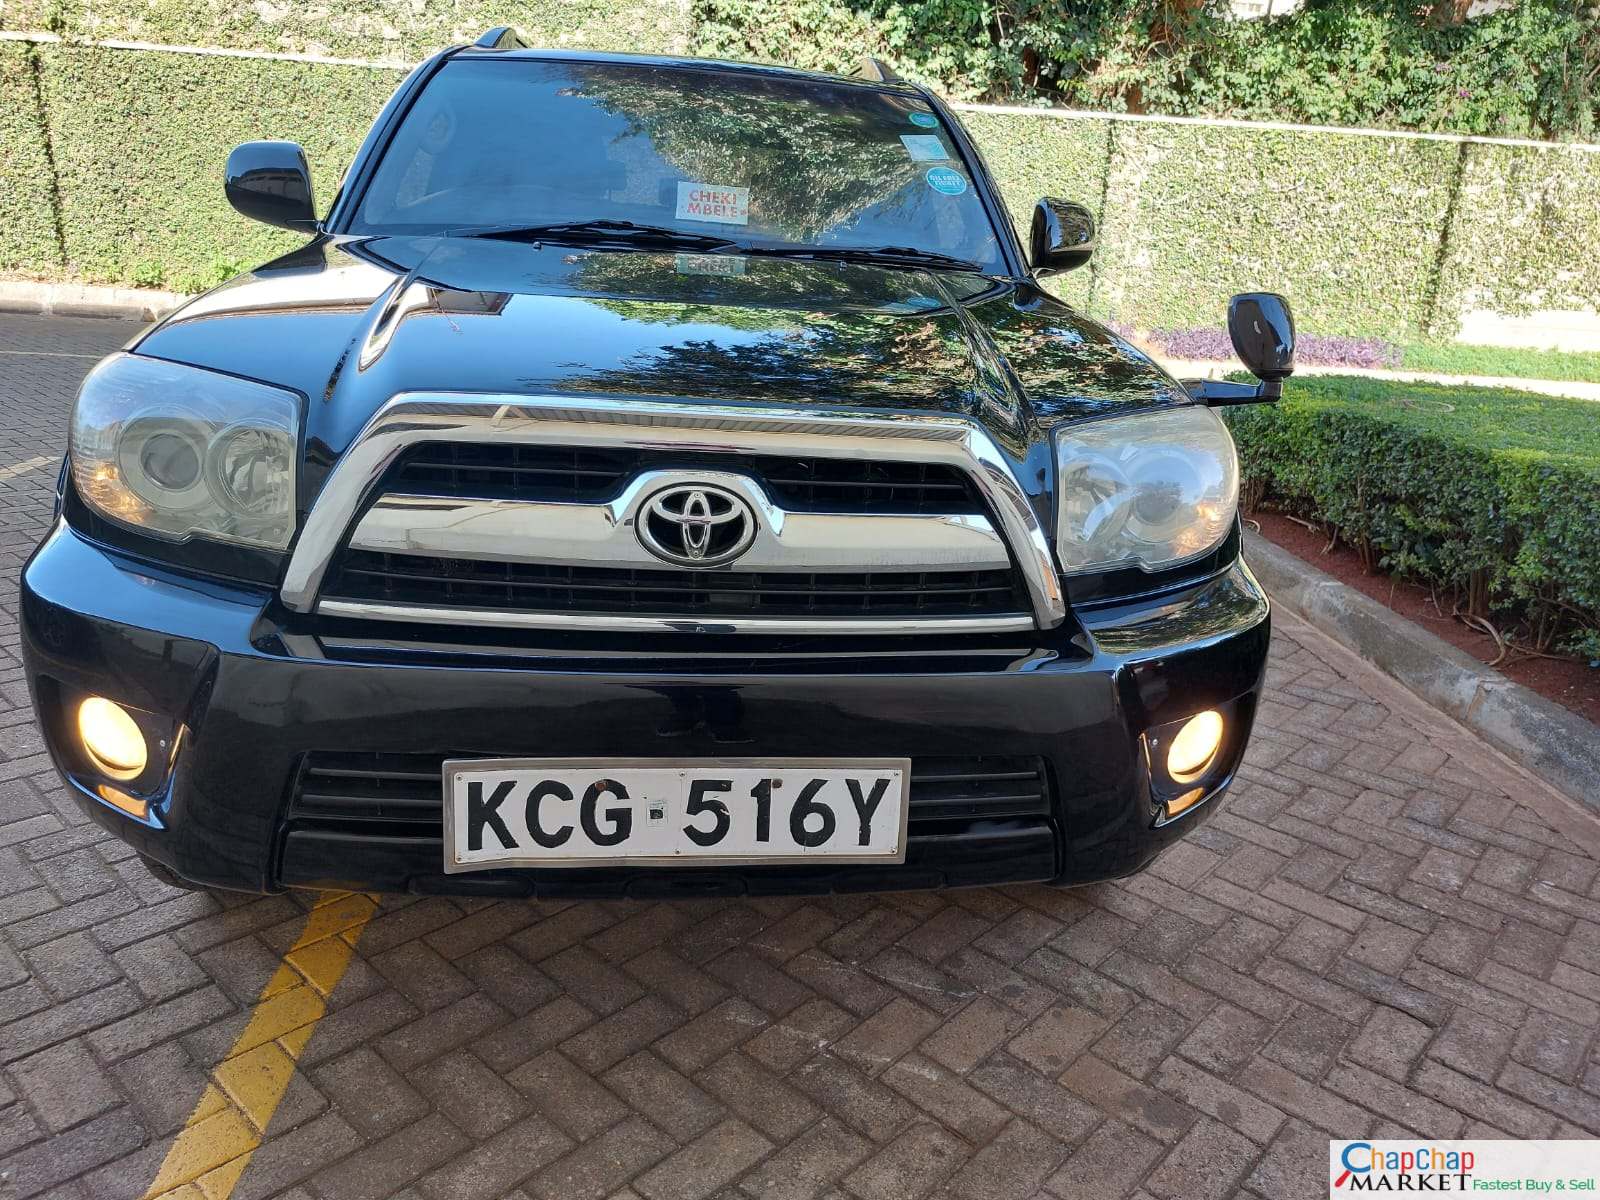 Toyota Hilux Surf You Pay 40% Deposit 60% Installments trade in OK EXCLUSIVE